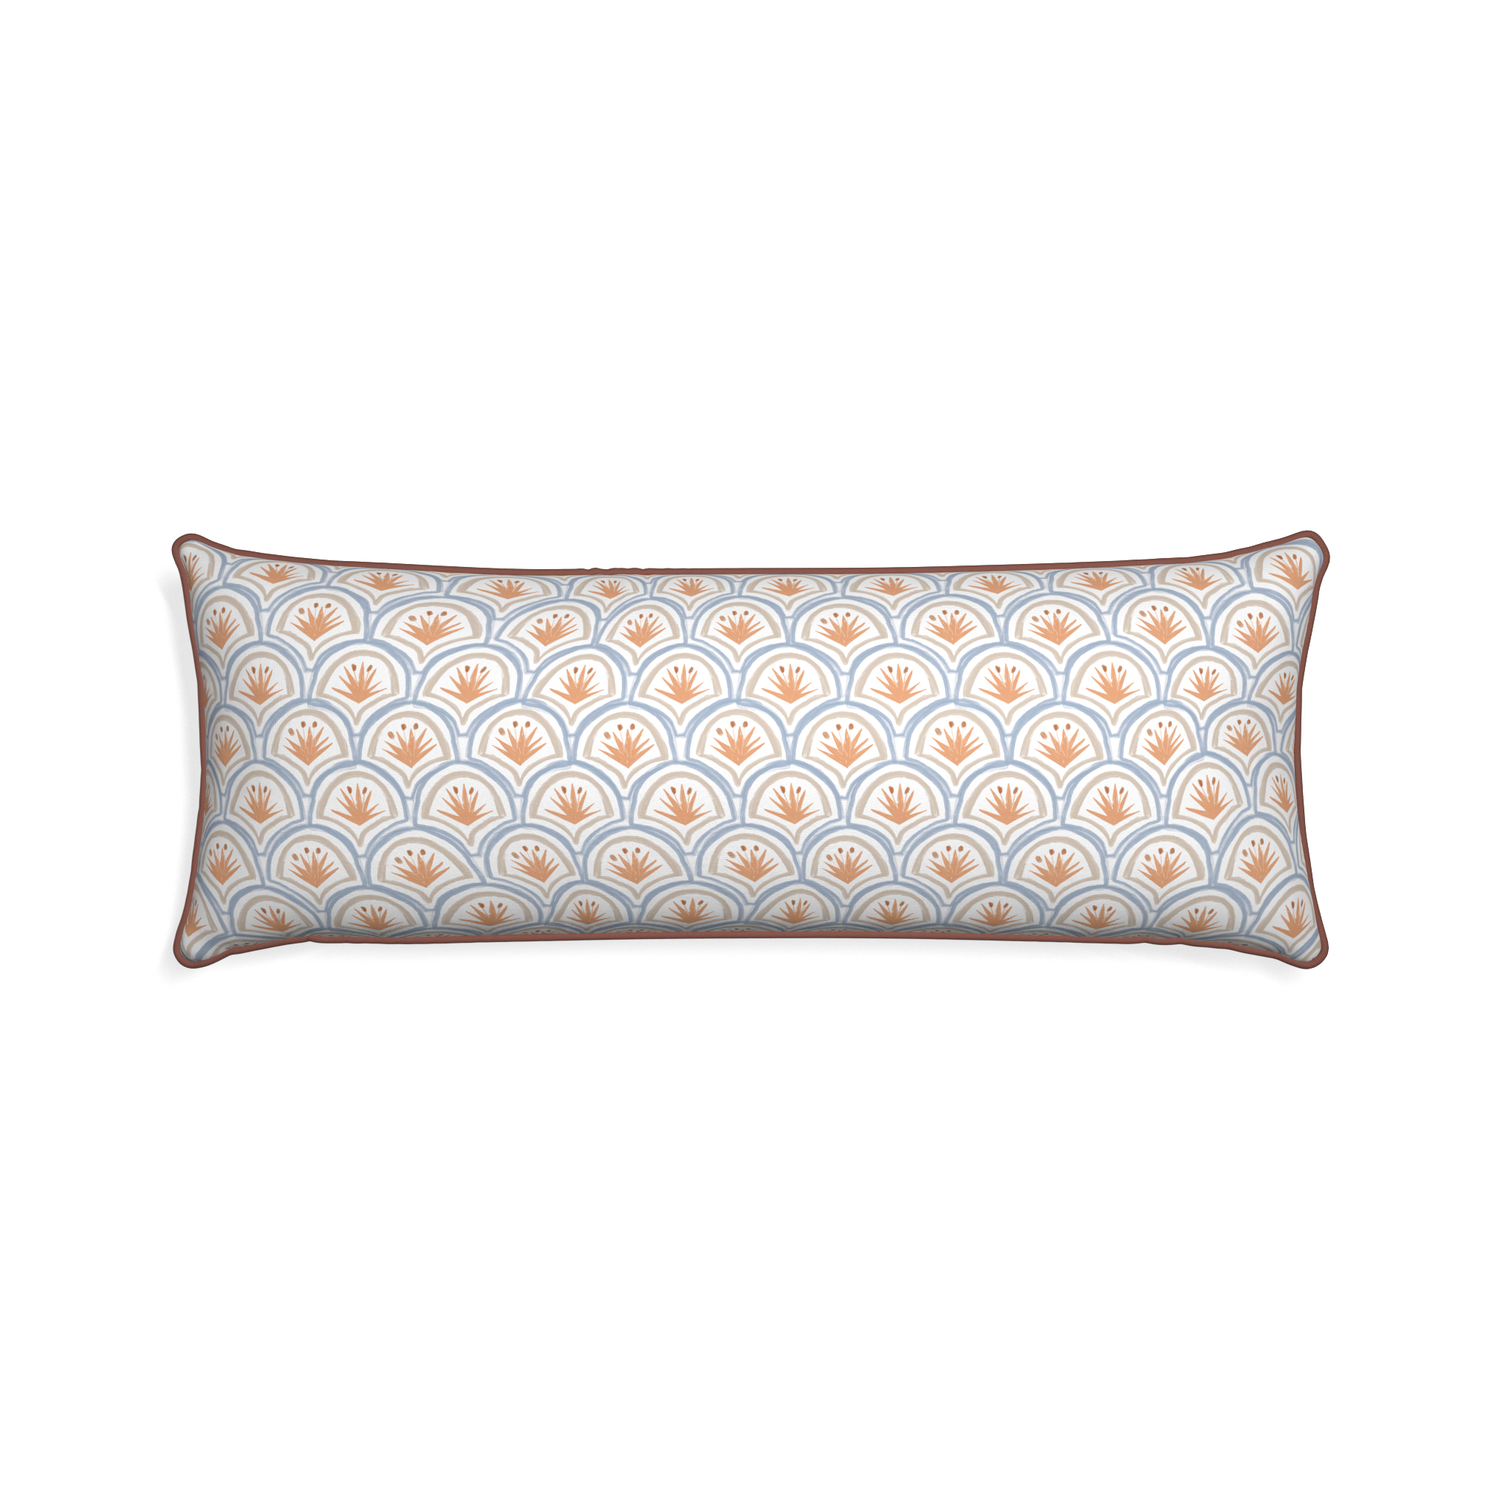 Xl-lumbar thatcher apricot custom pillow with w piping on white background